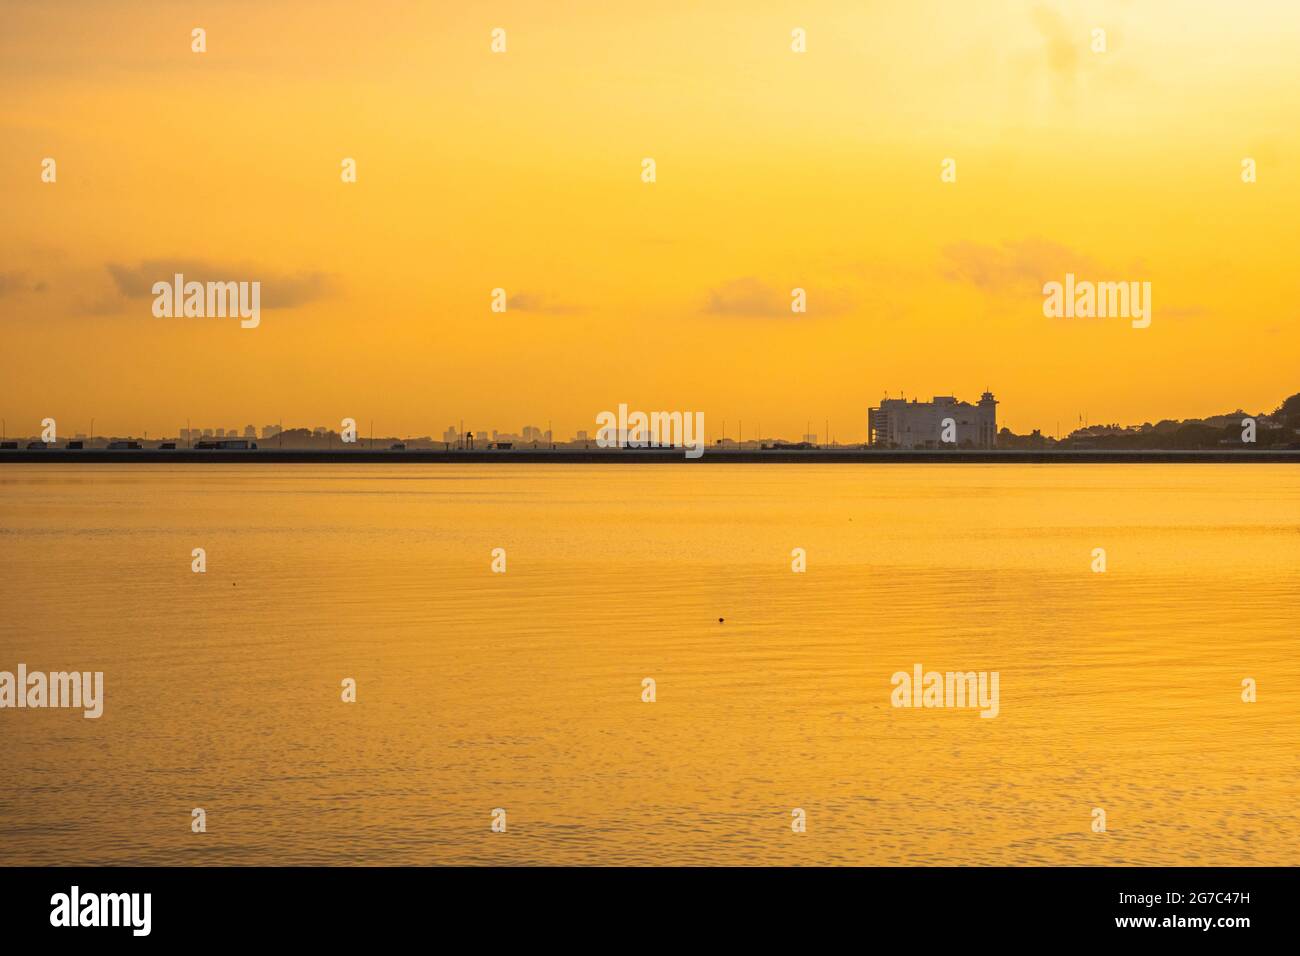 Distance view of the causeway that connects Singapore and Malaysia. Stock Photo